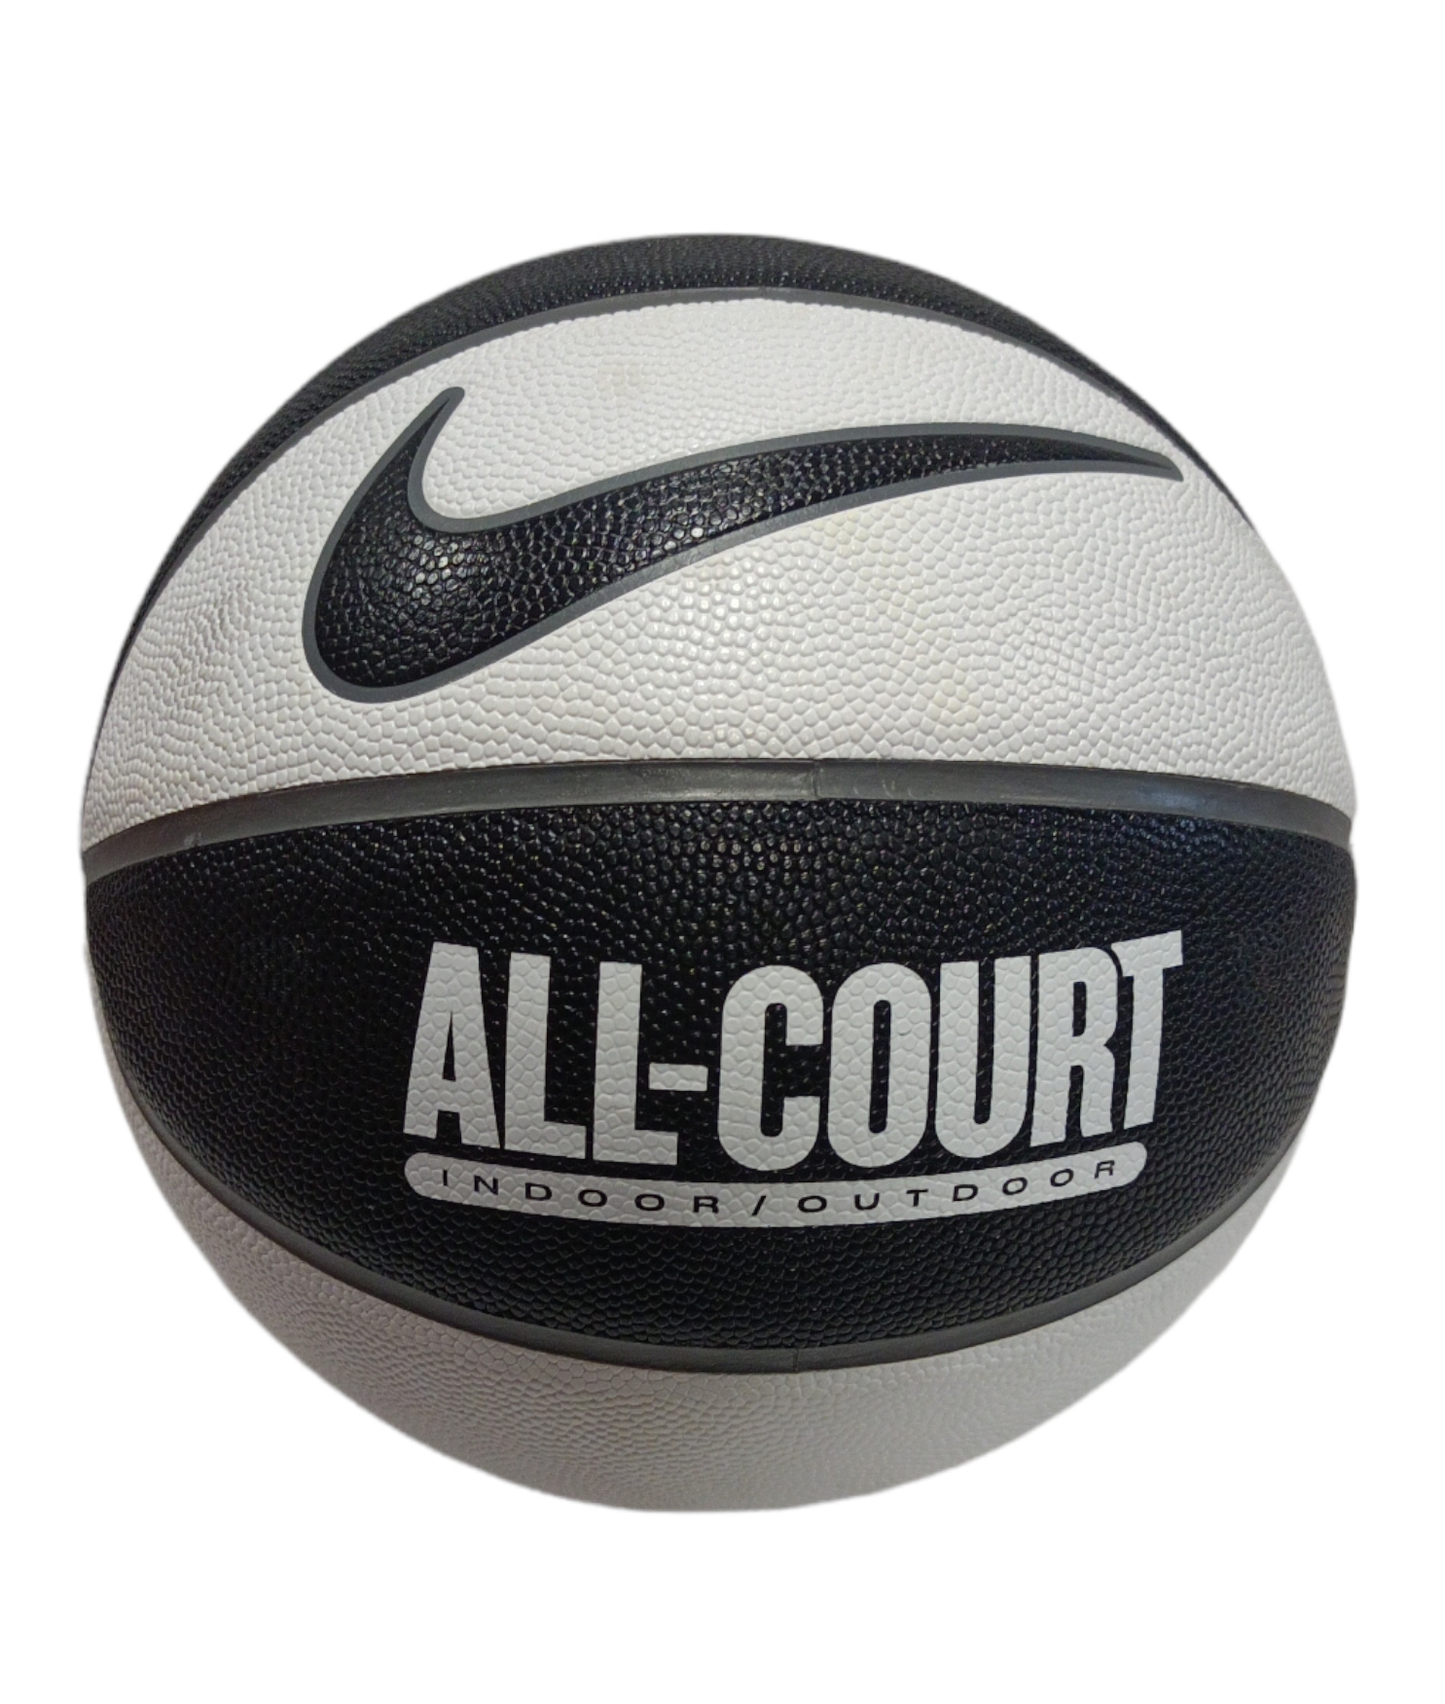 NIKE ALL-COURT BASKETBALL- SIZE 7